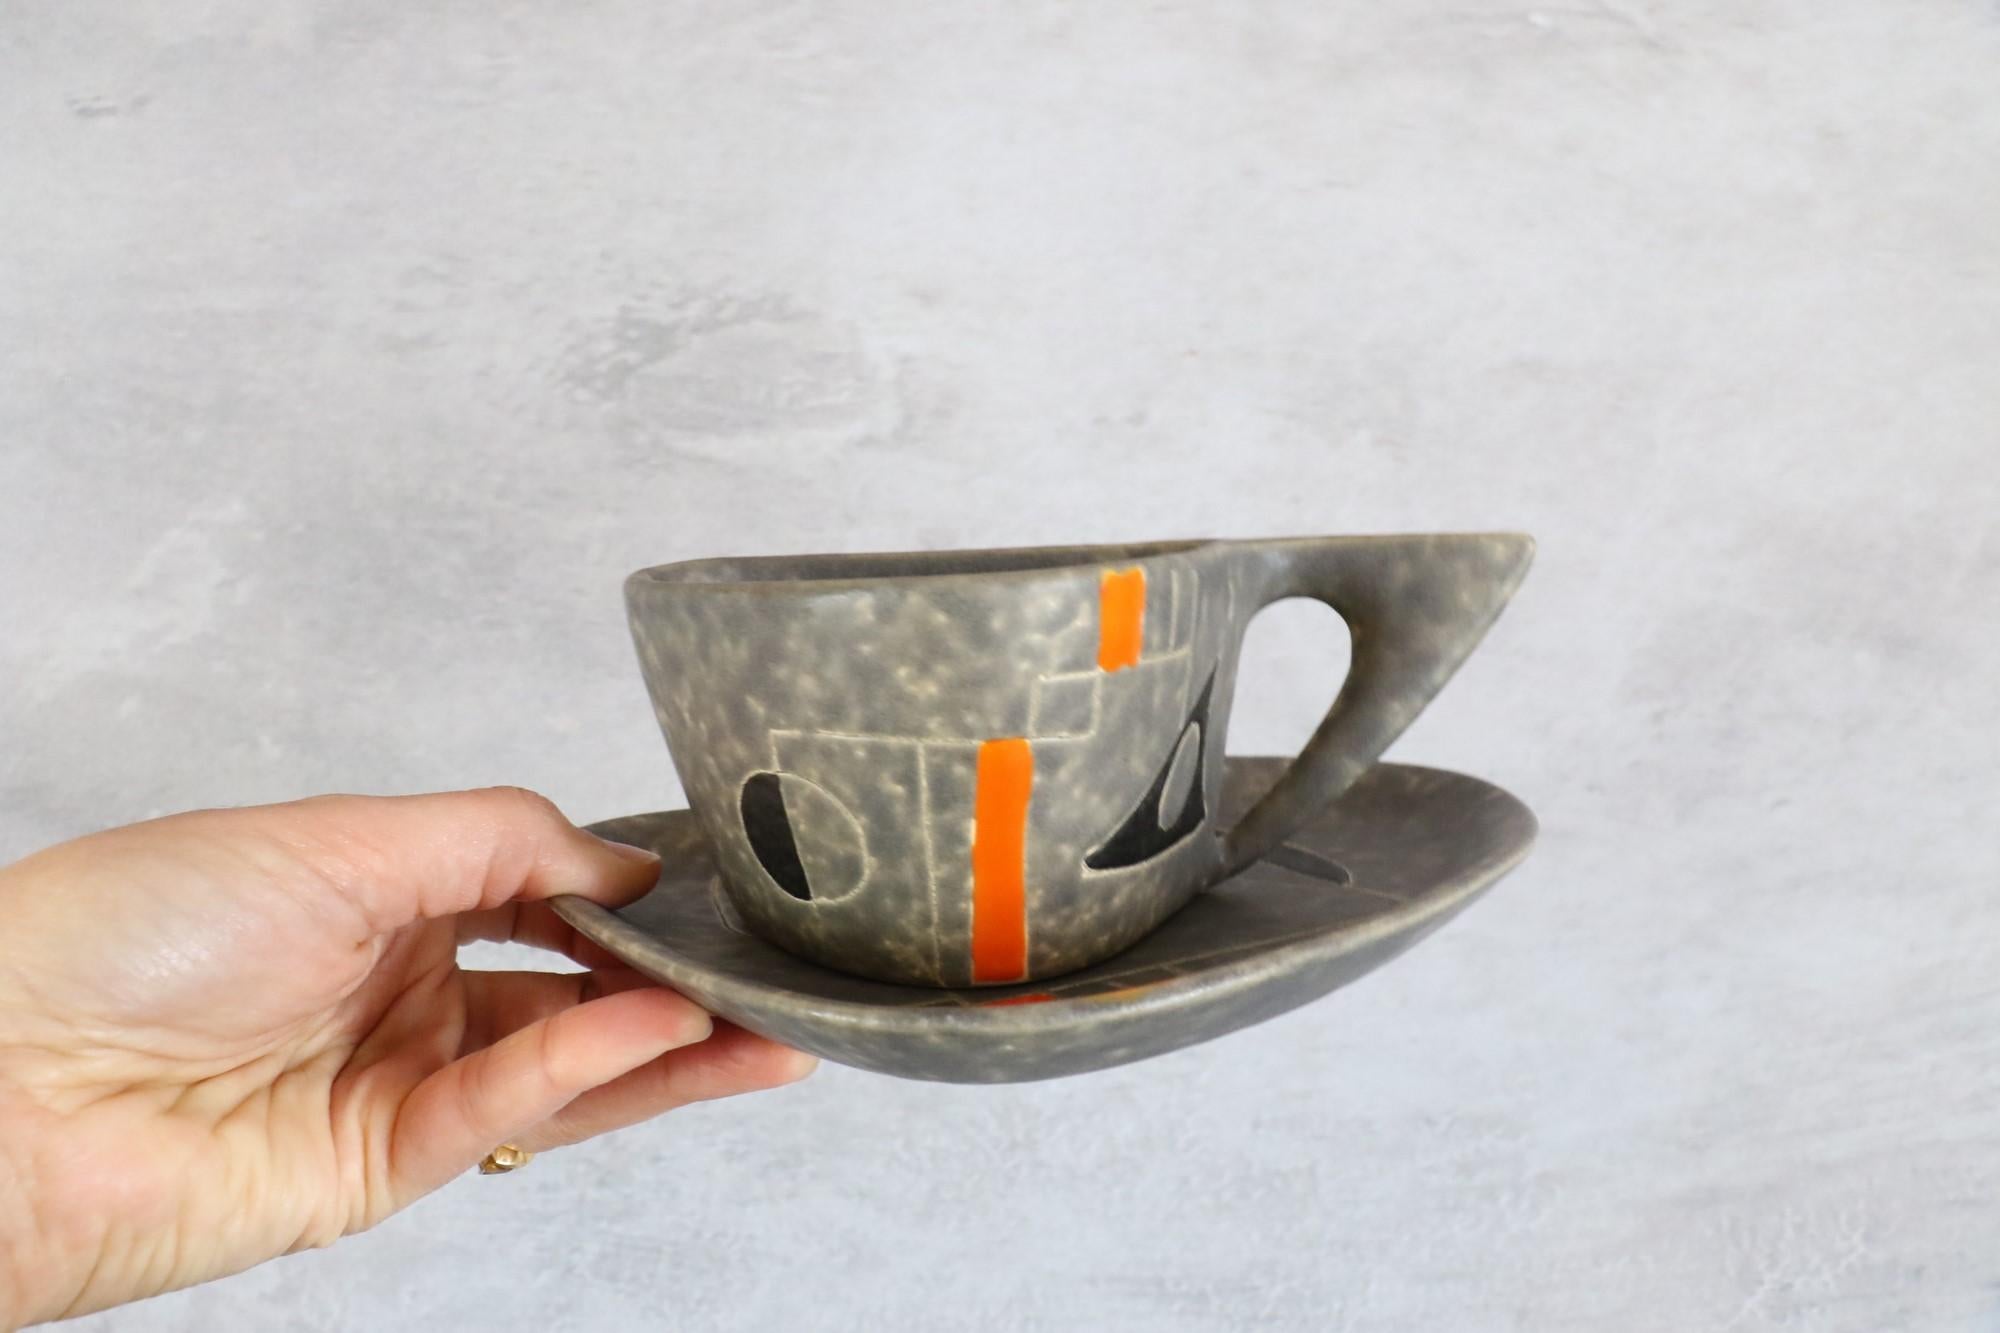 Peter & Denise Orlando, Mid-Century Modern ceramic tea set 1960s, Era Capron

Free form Ceramic cups and under cups by Peter and Denise Orlando, France 1960s.
Glazed in grey with abstract and geometric decoration engraved and over-glazed in